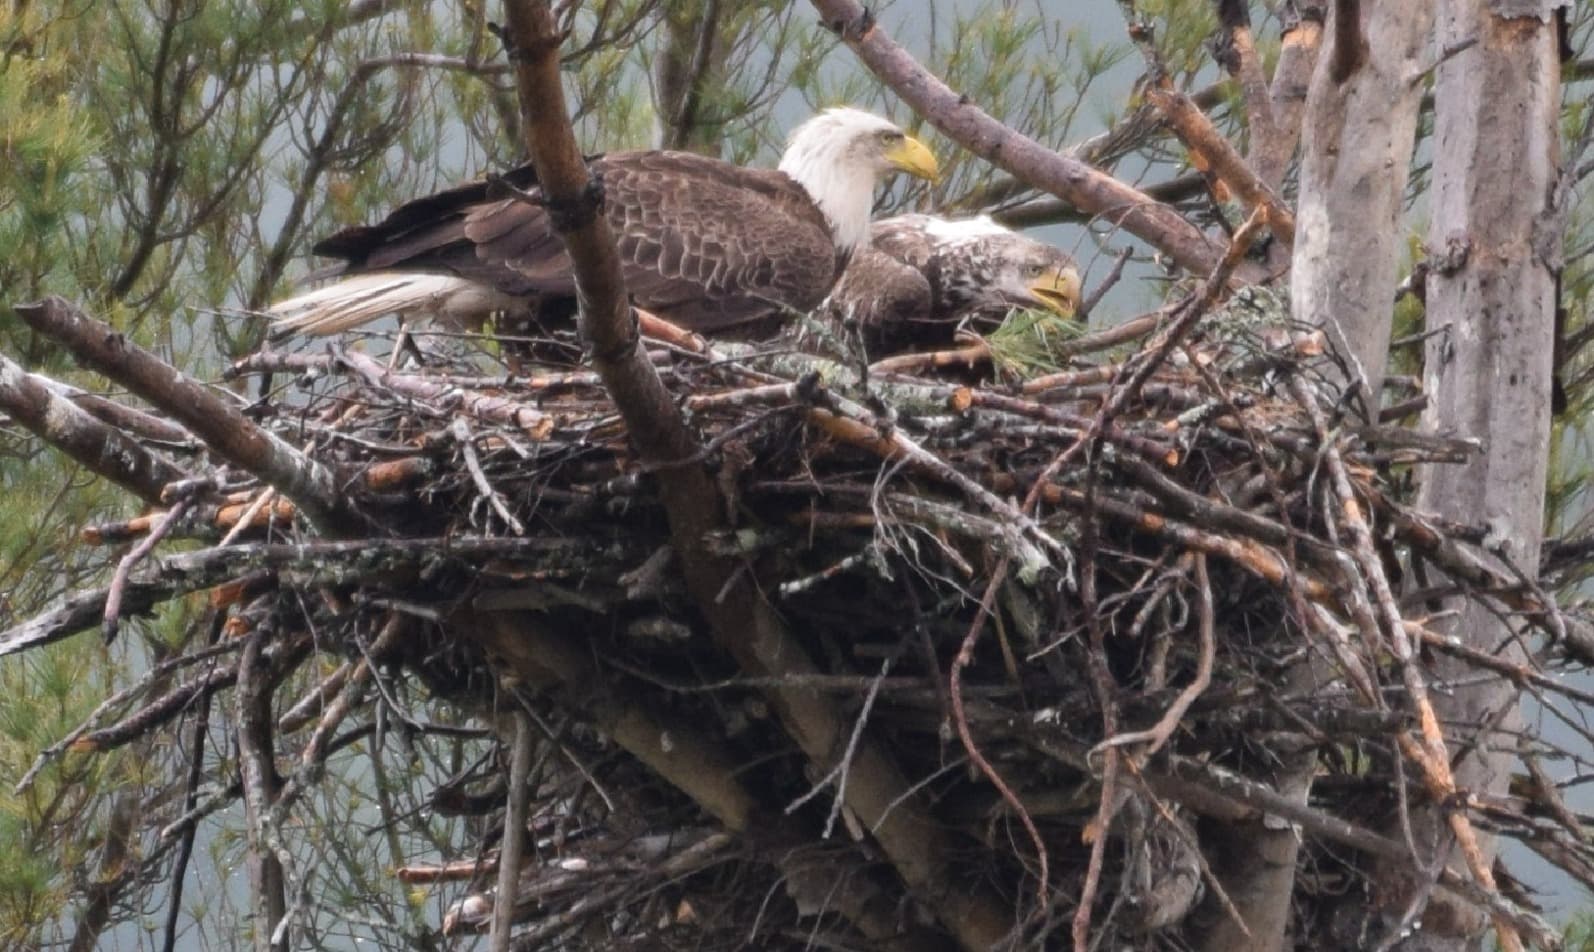 17.	Eagles nest from dock